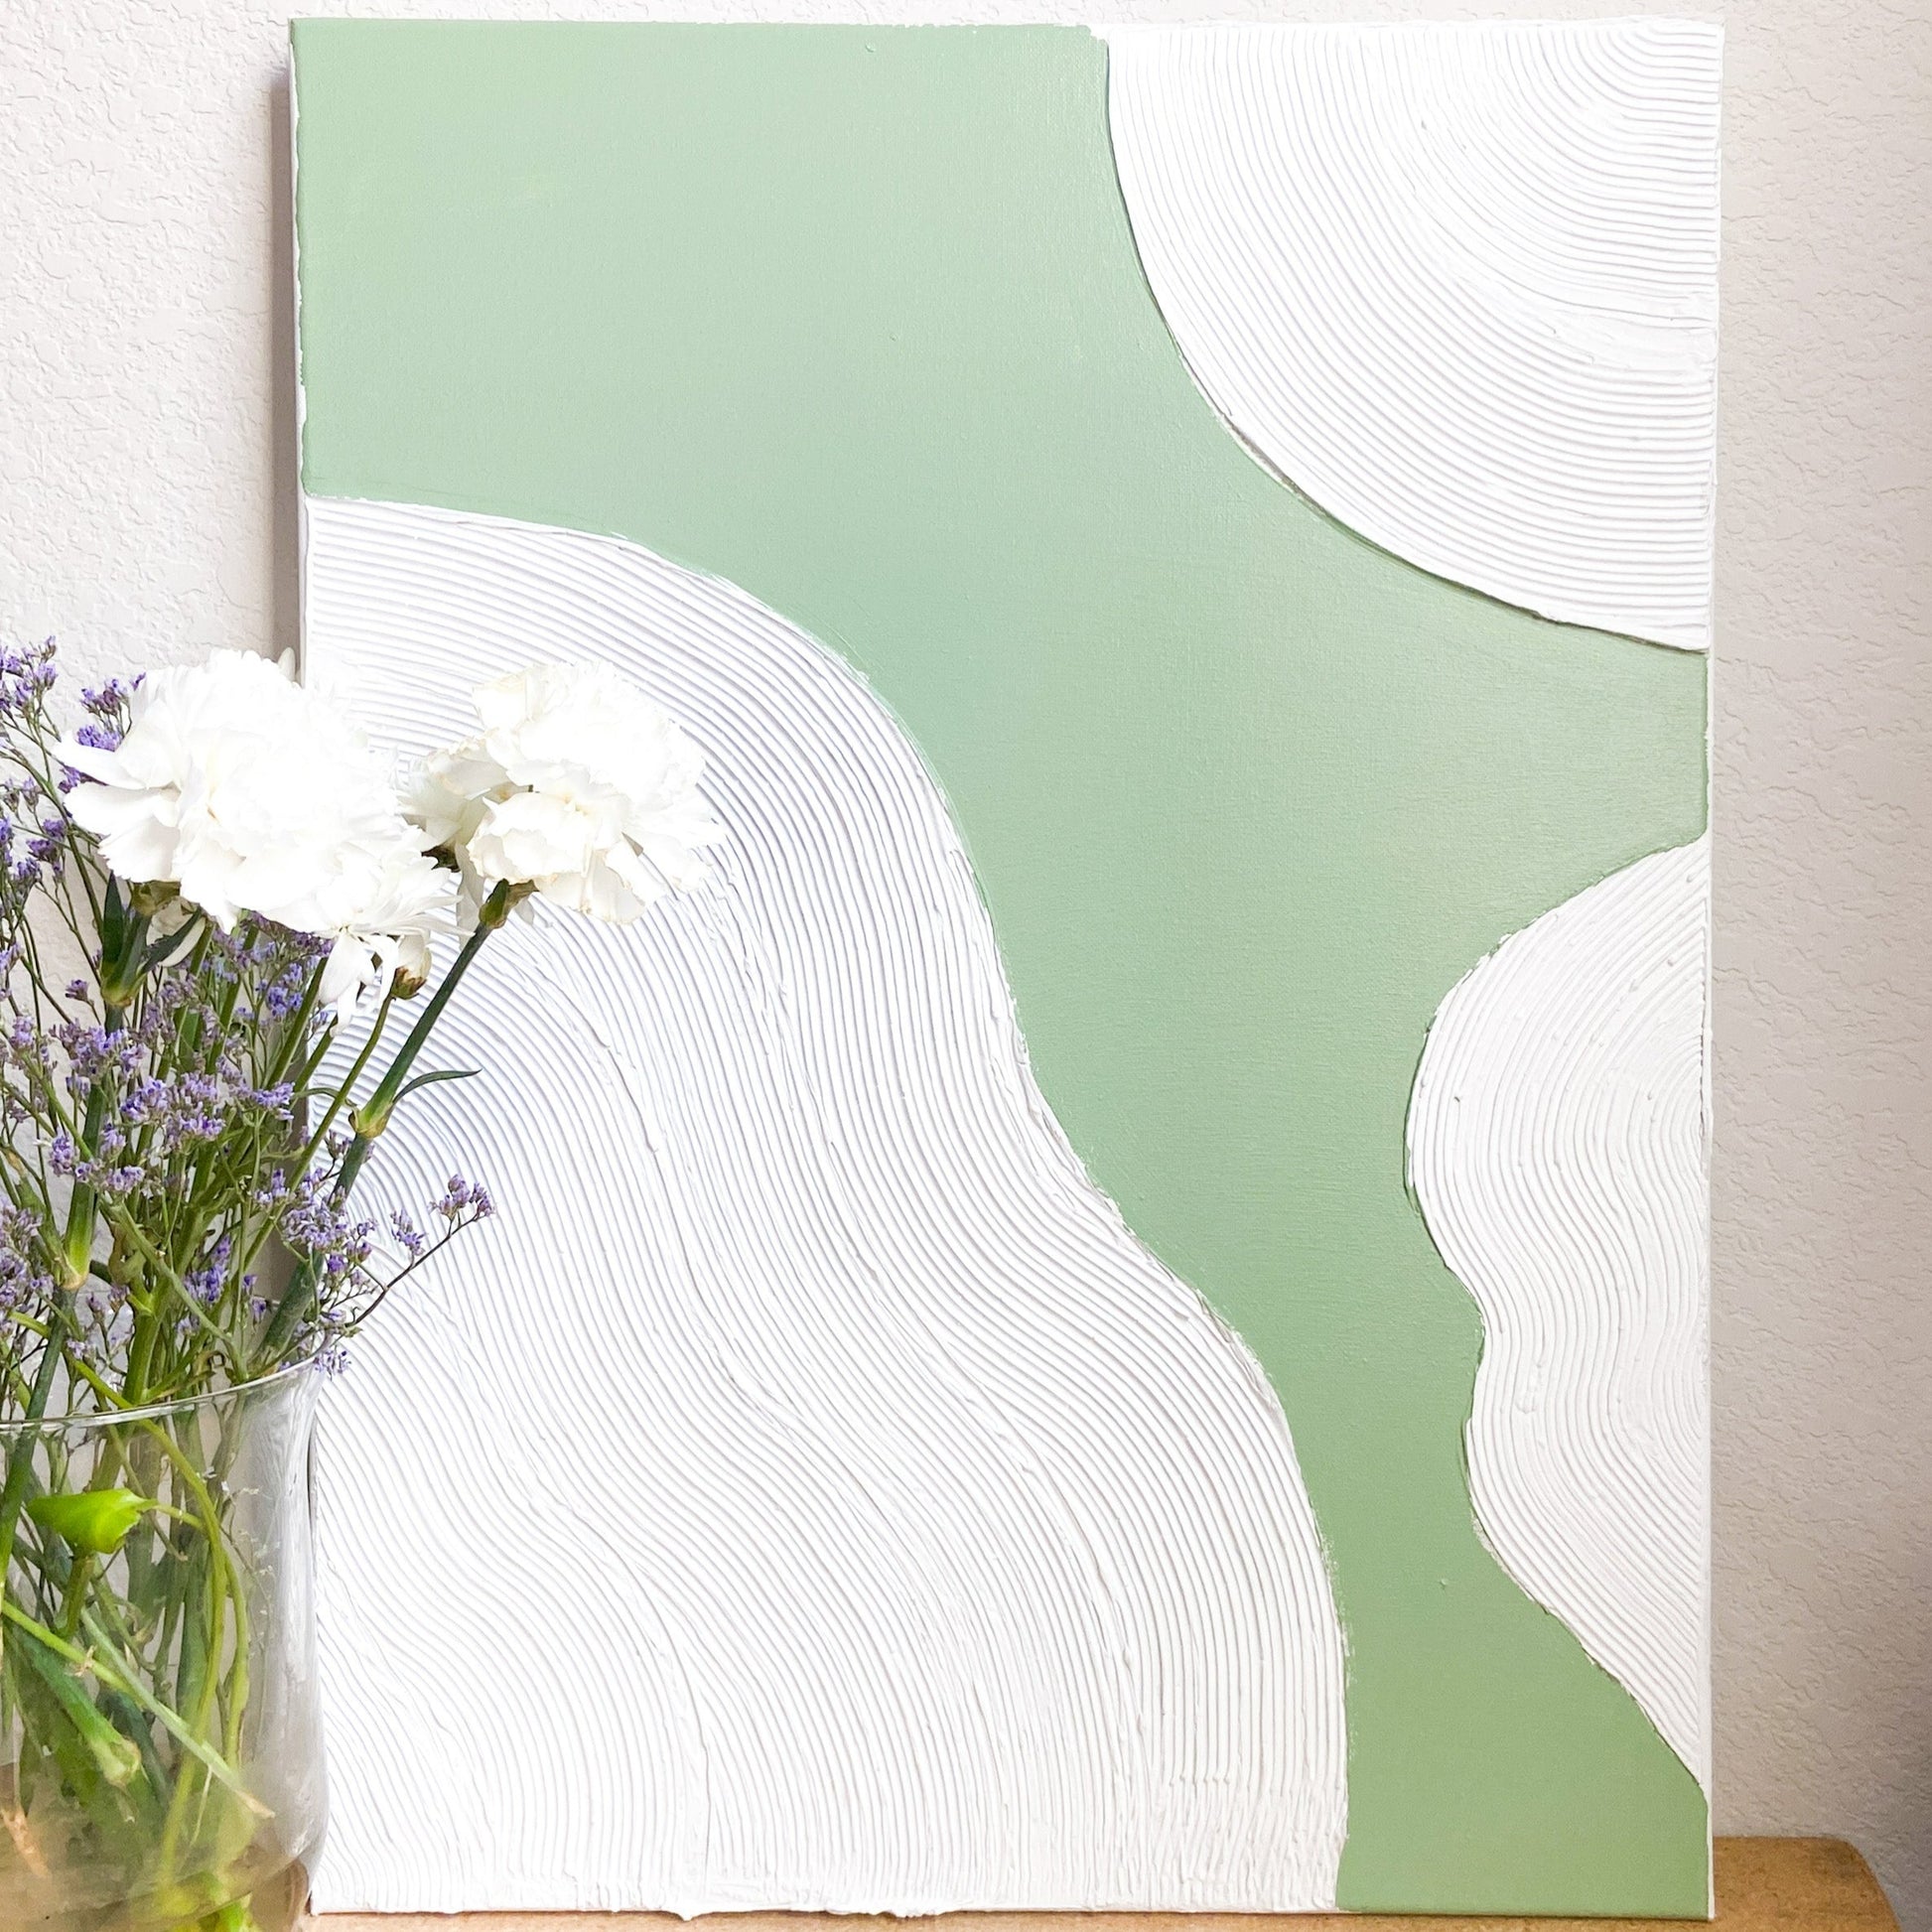 Green and White Textured art canvas